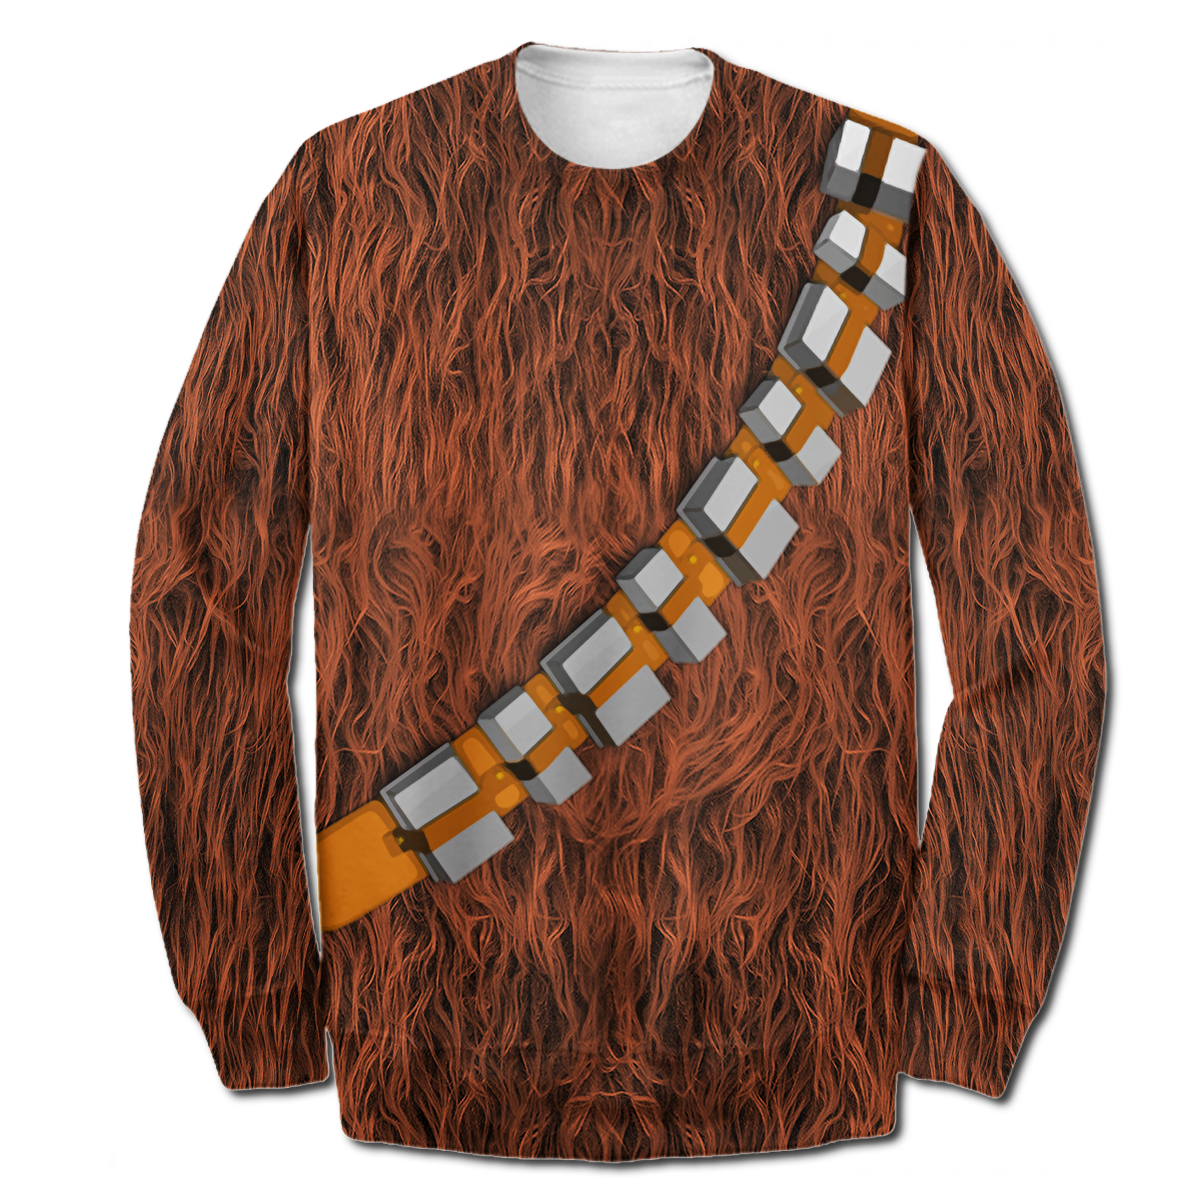 Unifinz SW T-shirt Chewbacca Limited 3D Print Costume T-shirt Amazing SW Hoodie Sweater Tank 2024